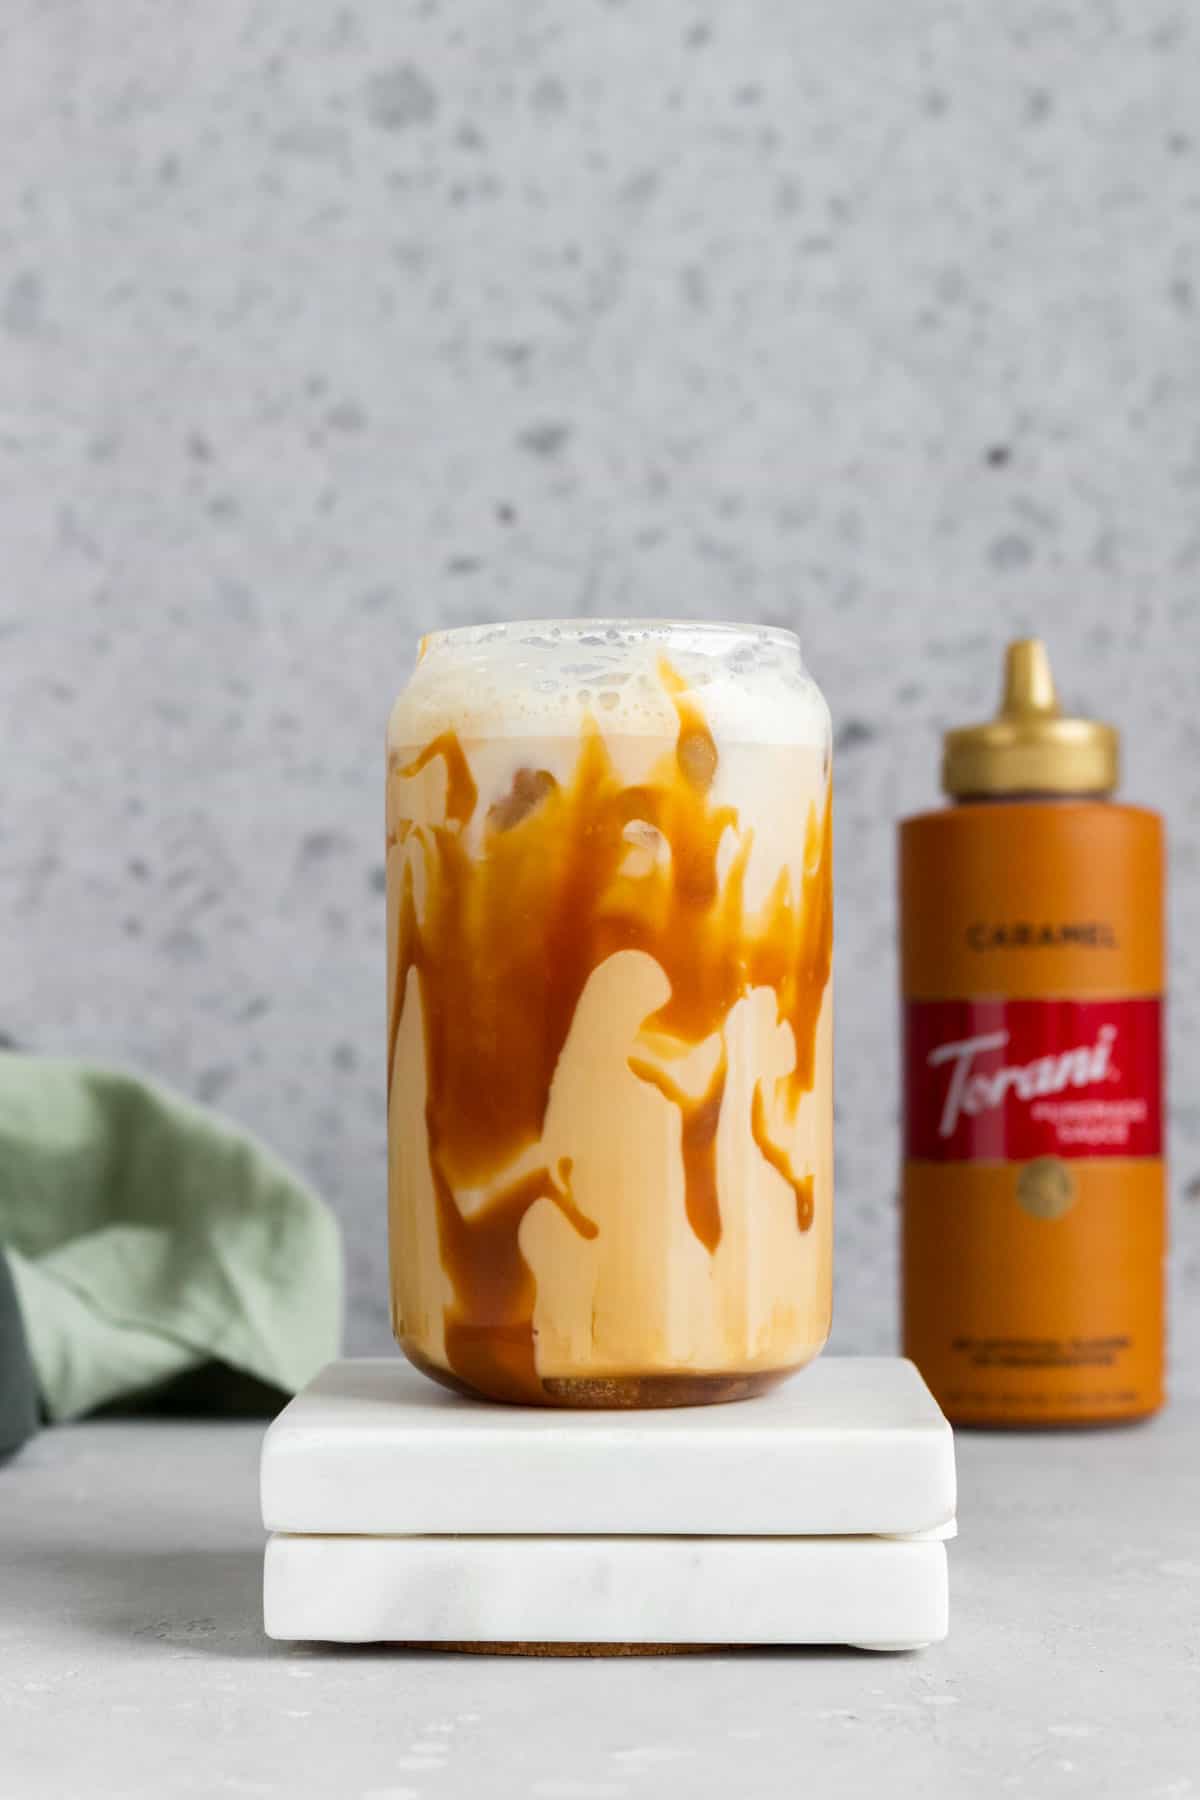 A glass of iced caramel latte with caramel drizzled inside the glass on top of two coasters.